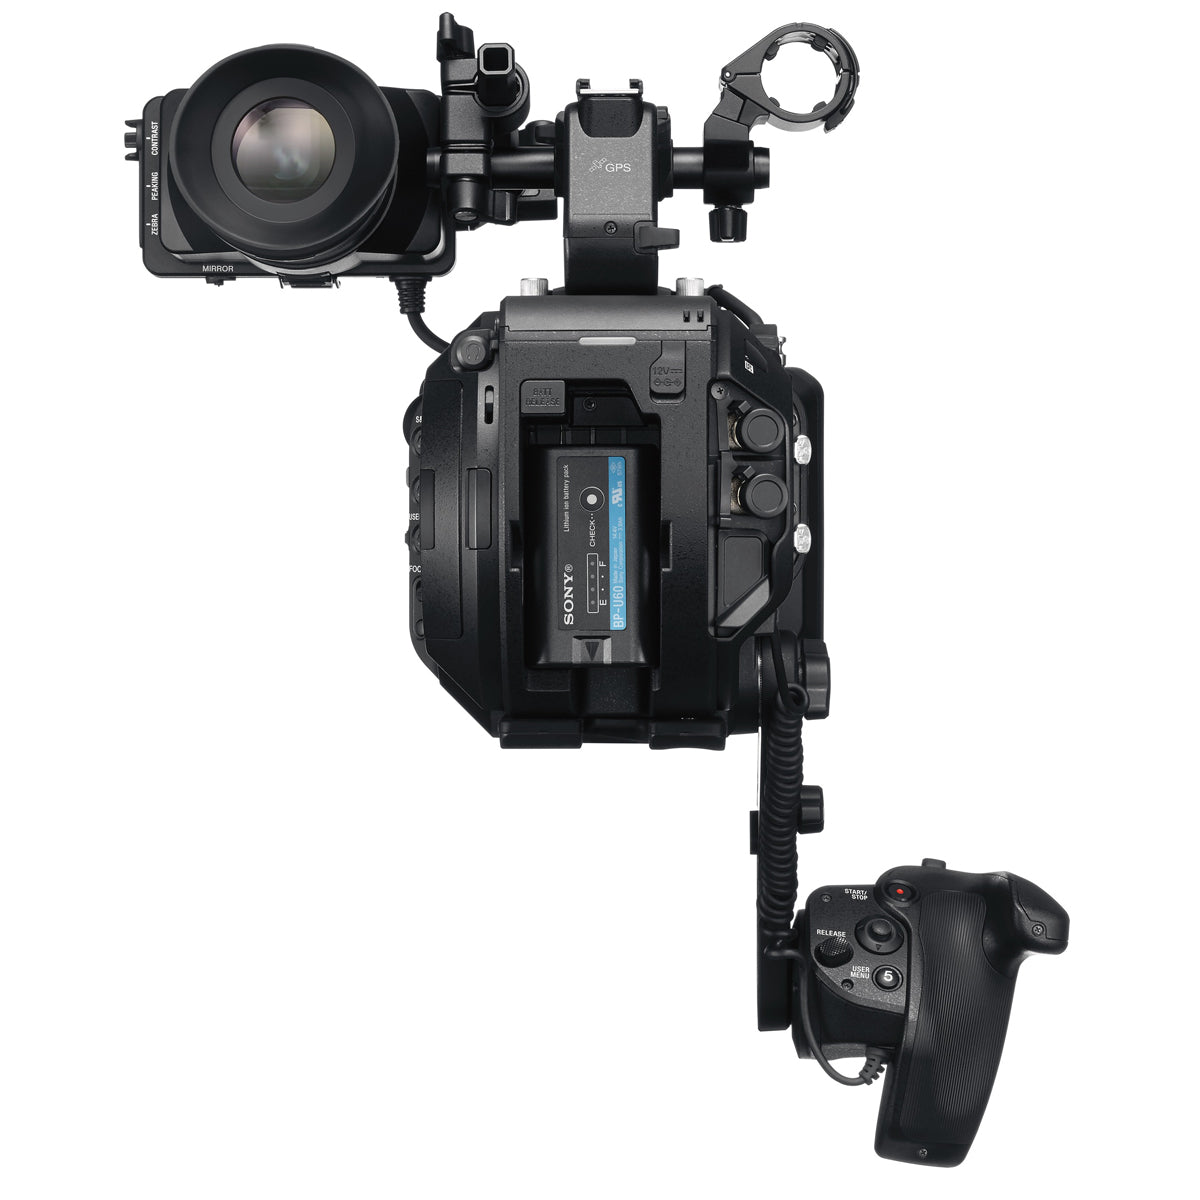 Sony PXW-FS7 II XDCAM Super 35 Camera System with 18-110mm Lens